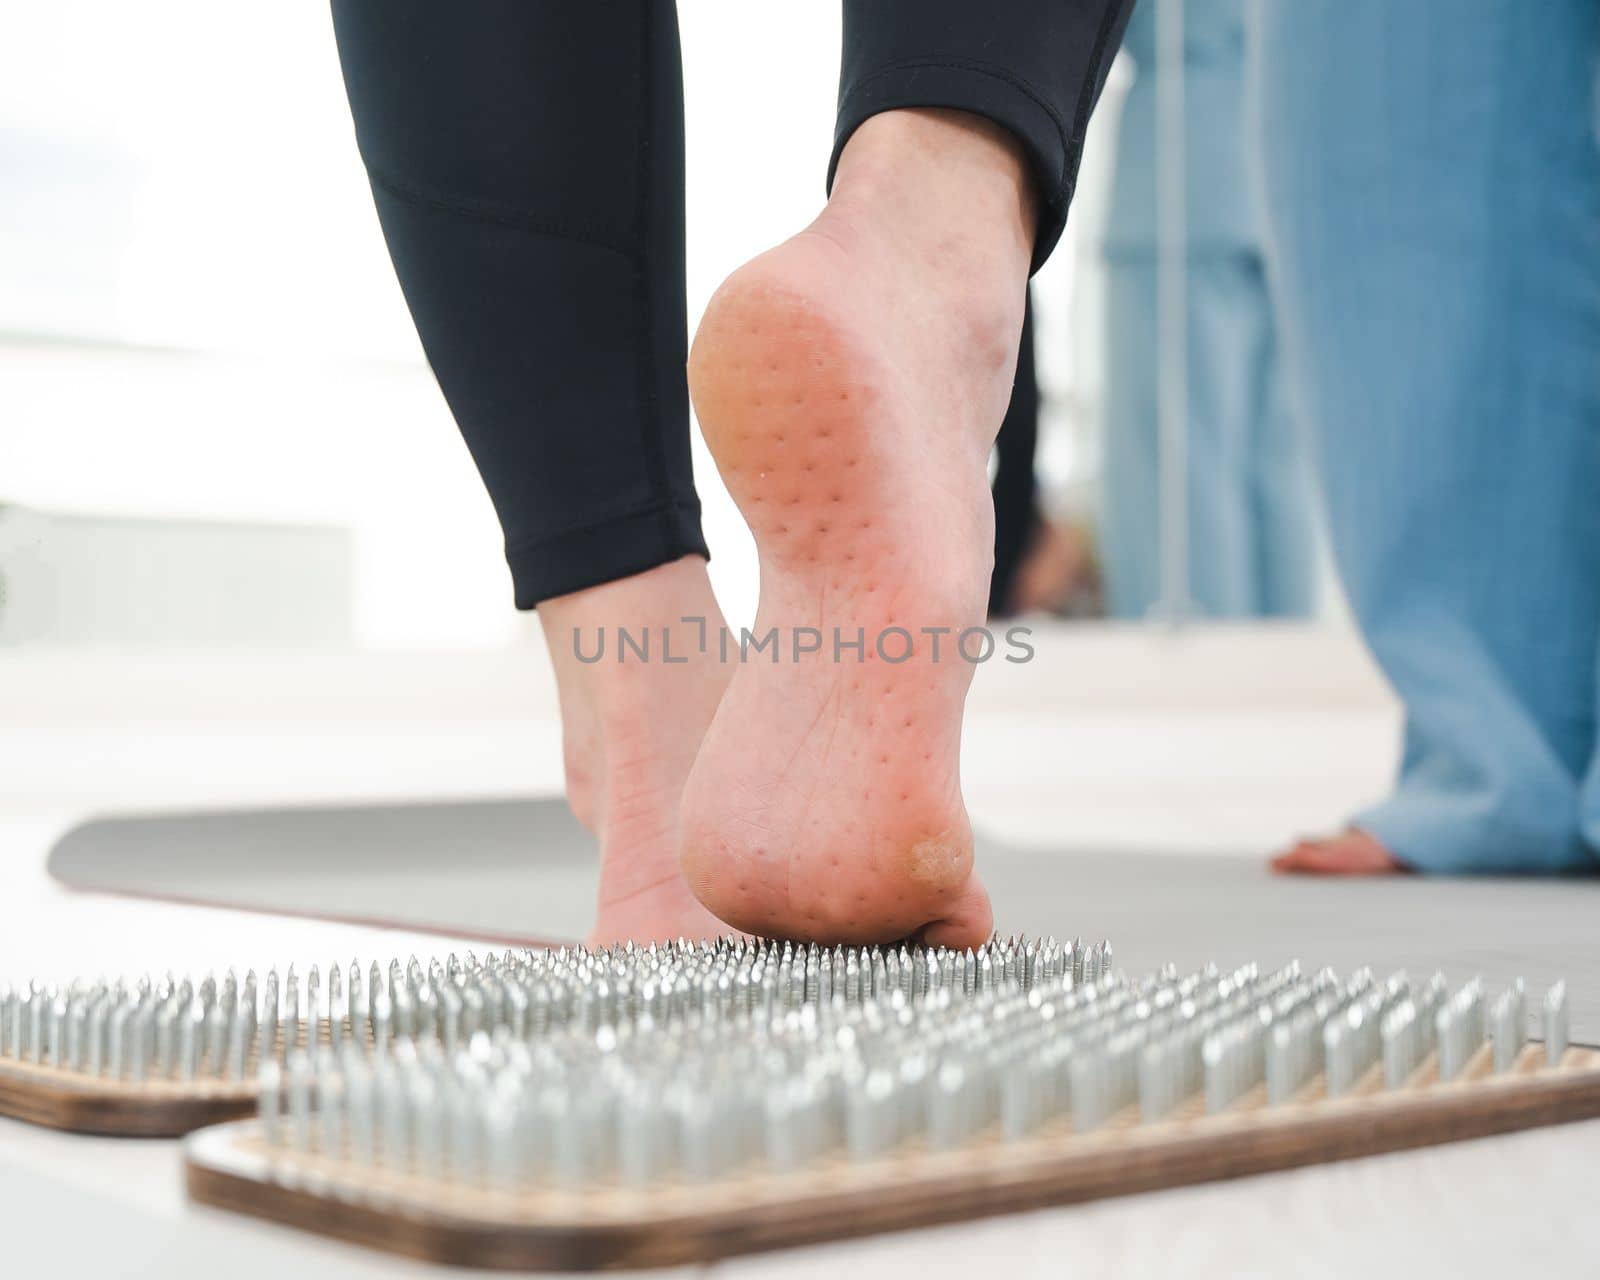 A woman comes down from the sadhu boards. Close-up of feet with prints after nails. by mrwed54